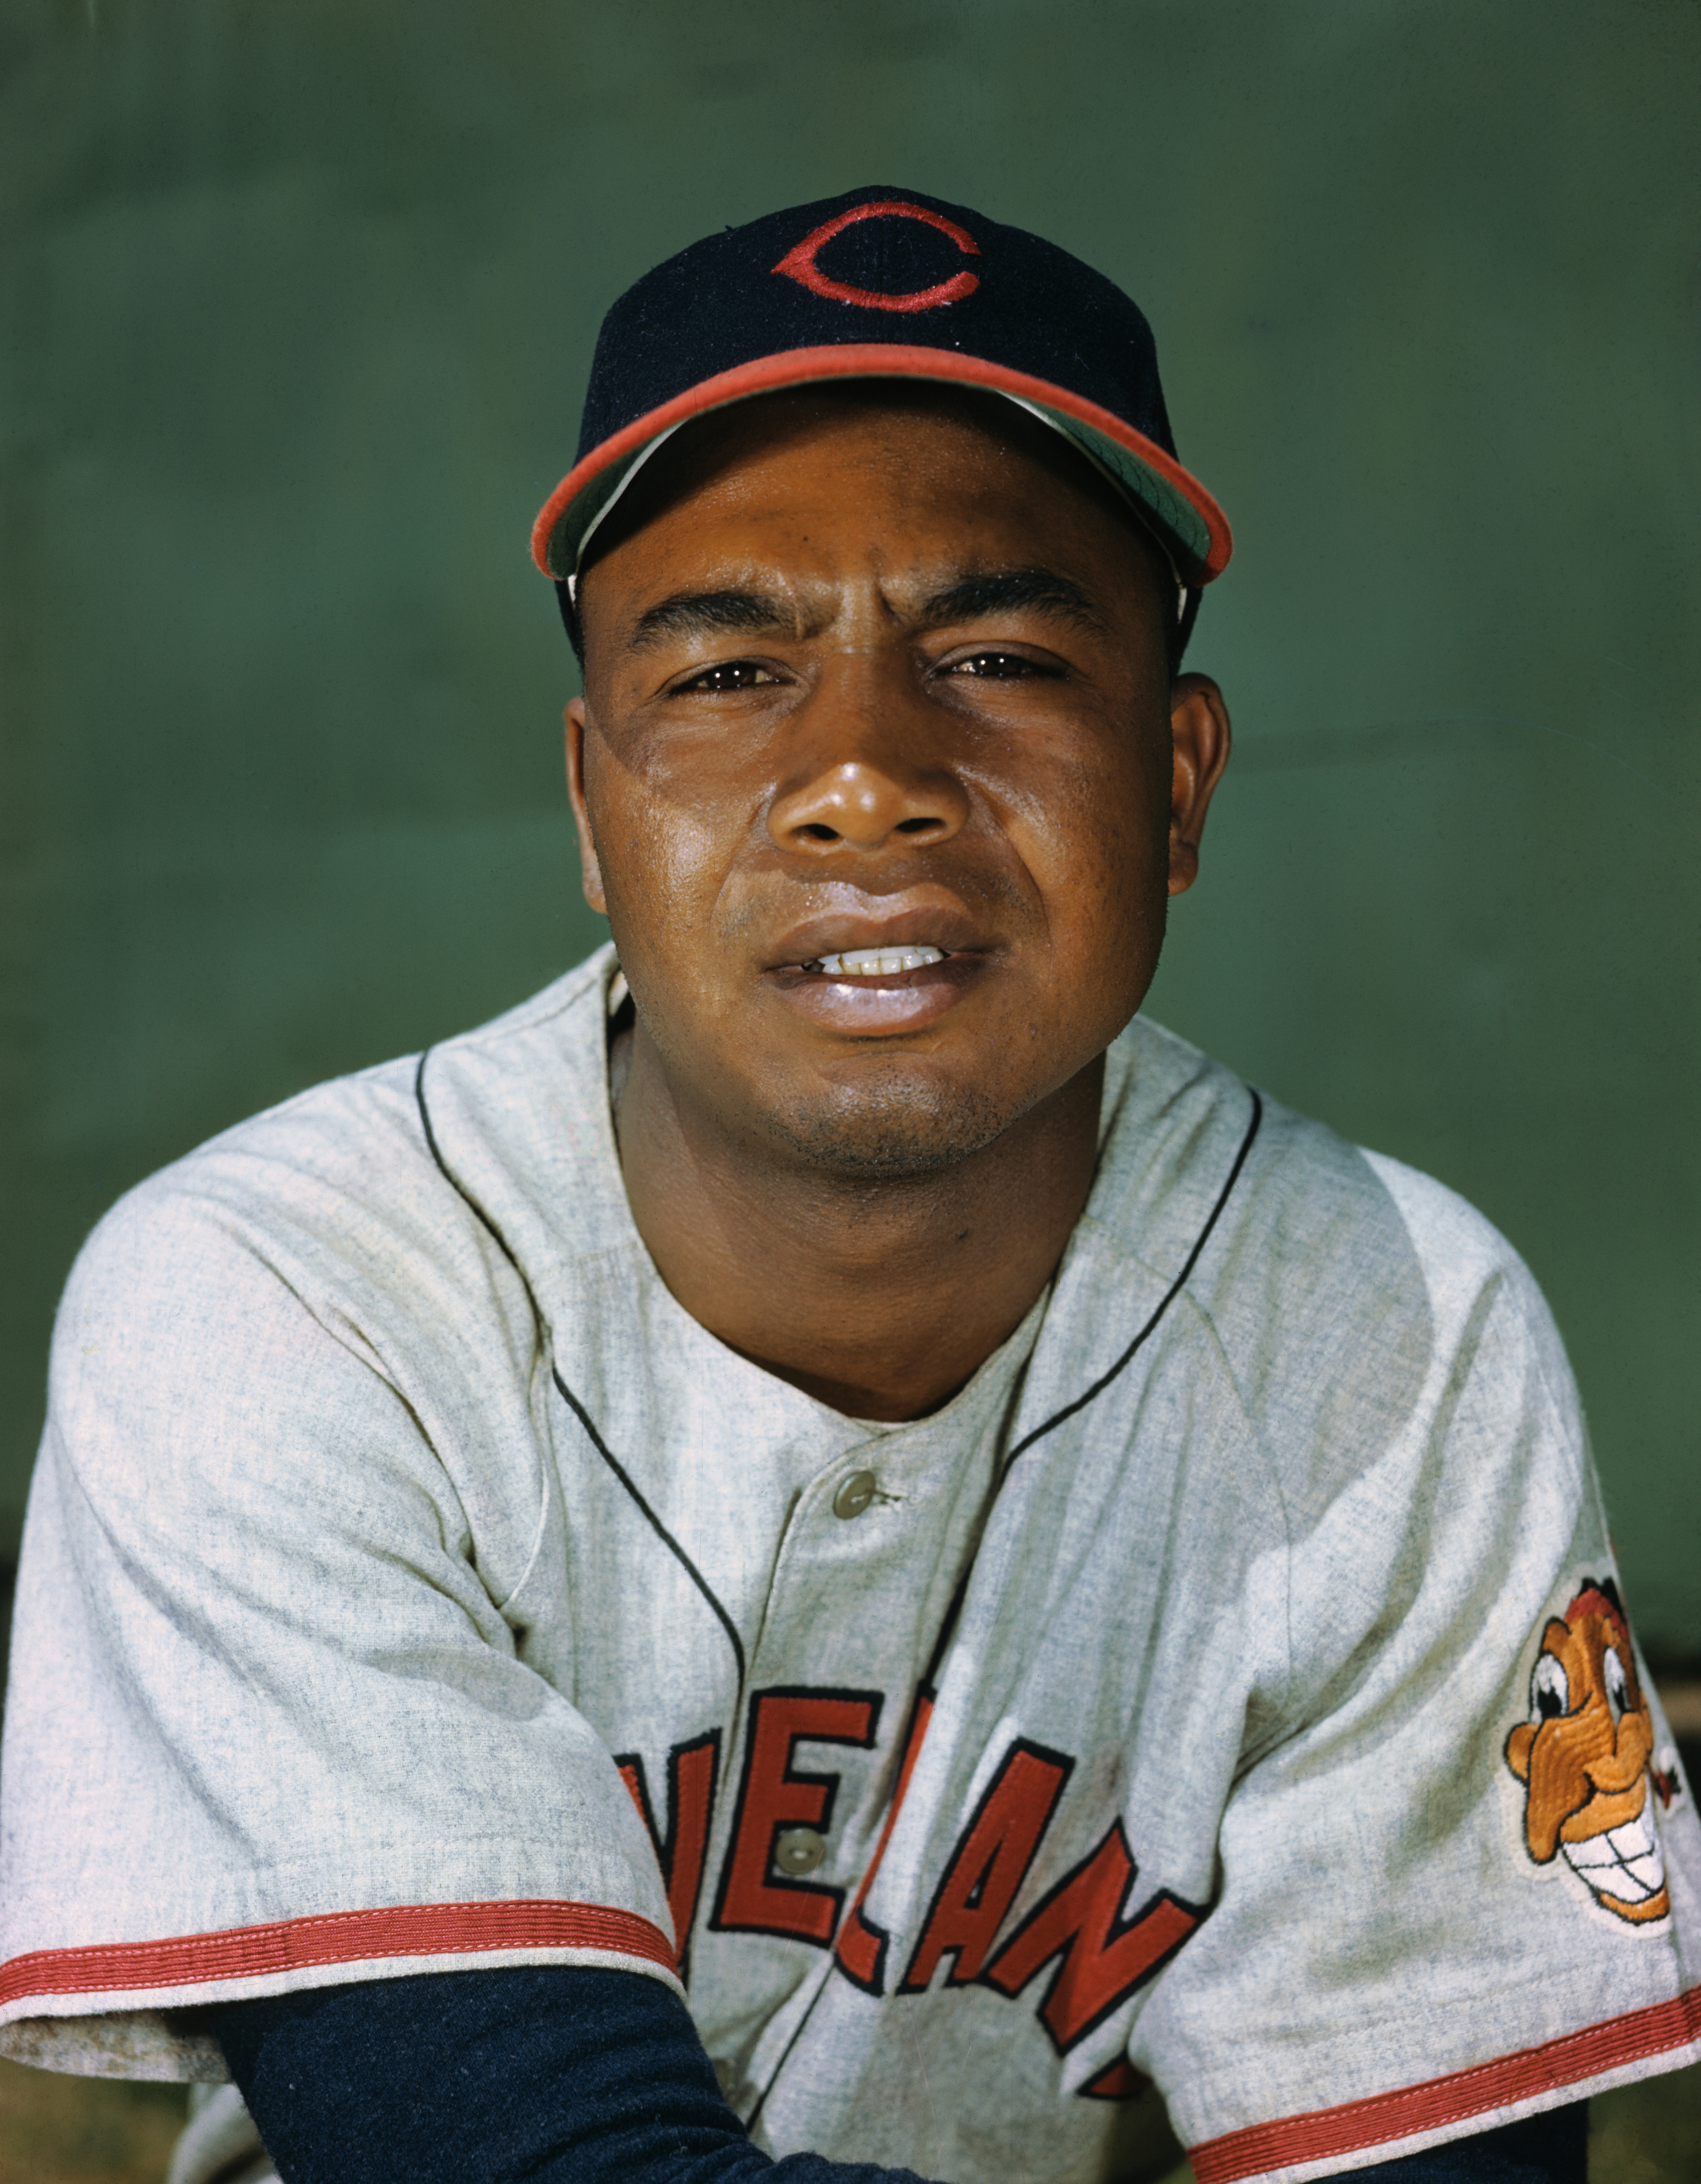 Cleveland Indians Baseball Player Larry Doby